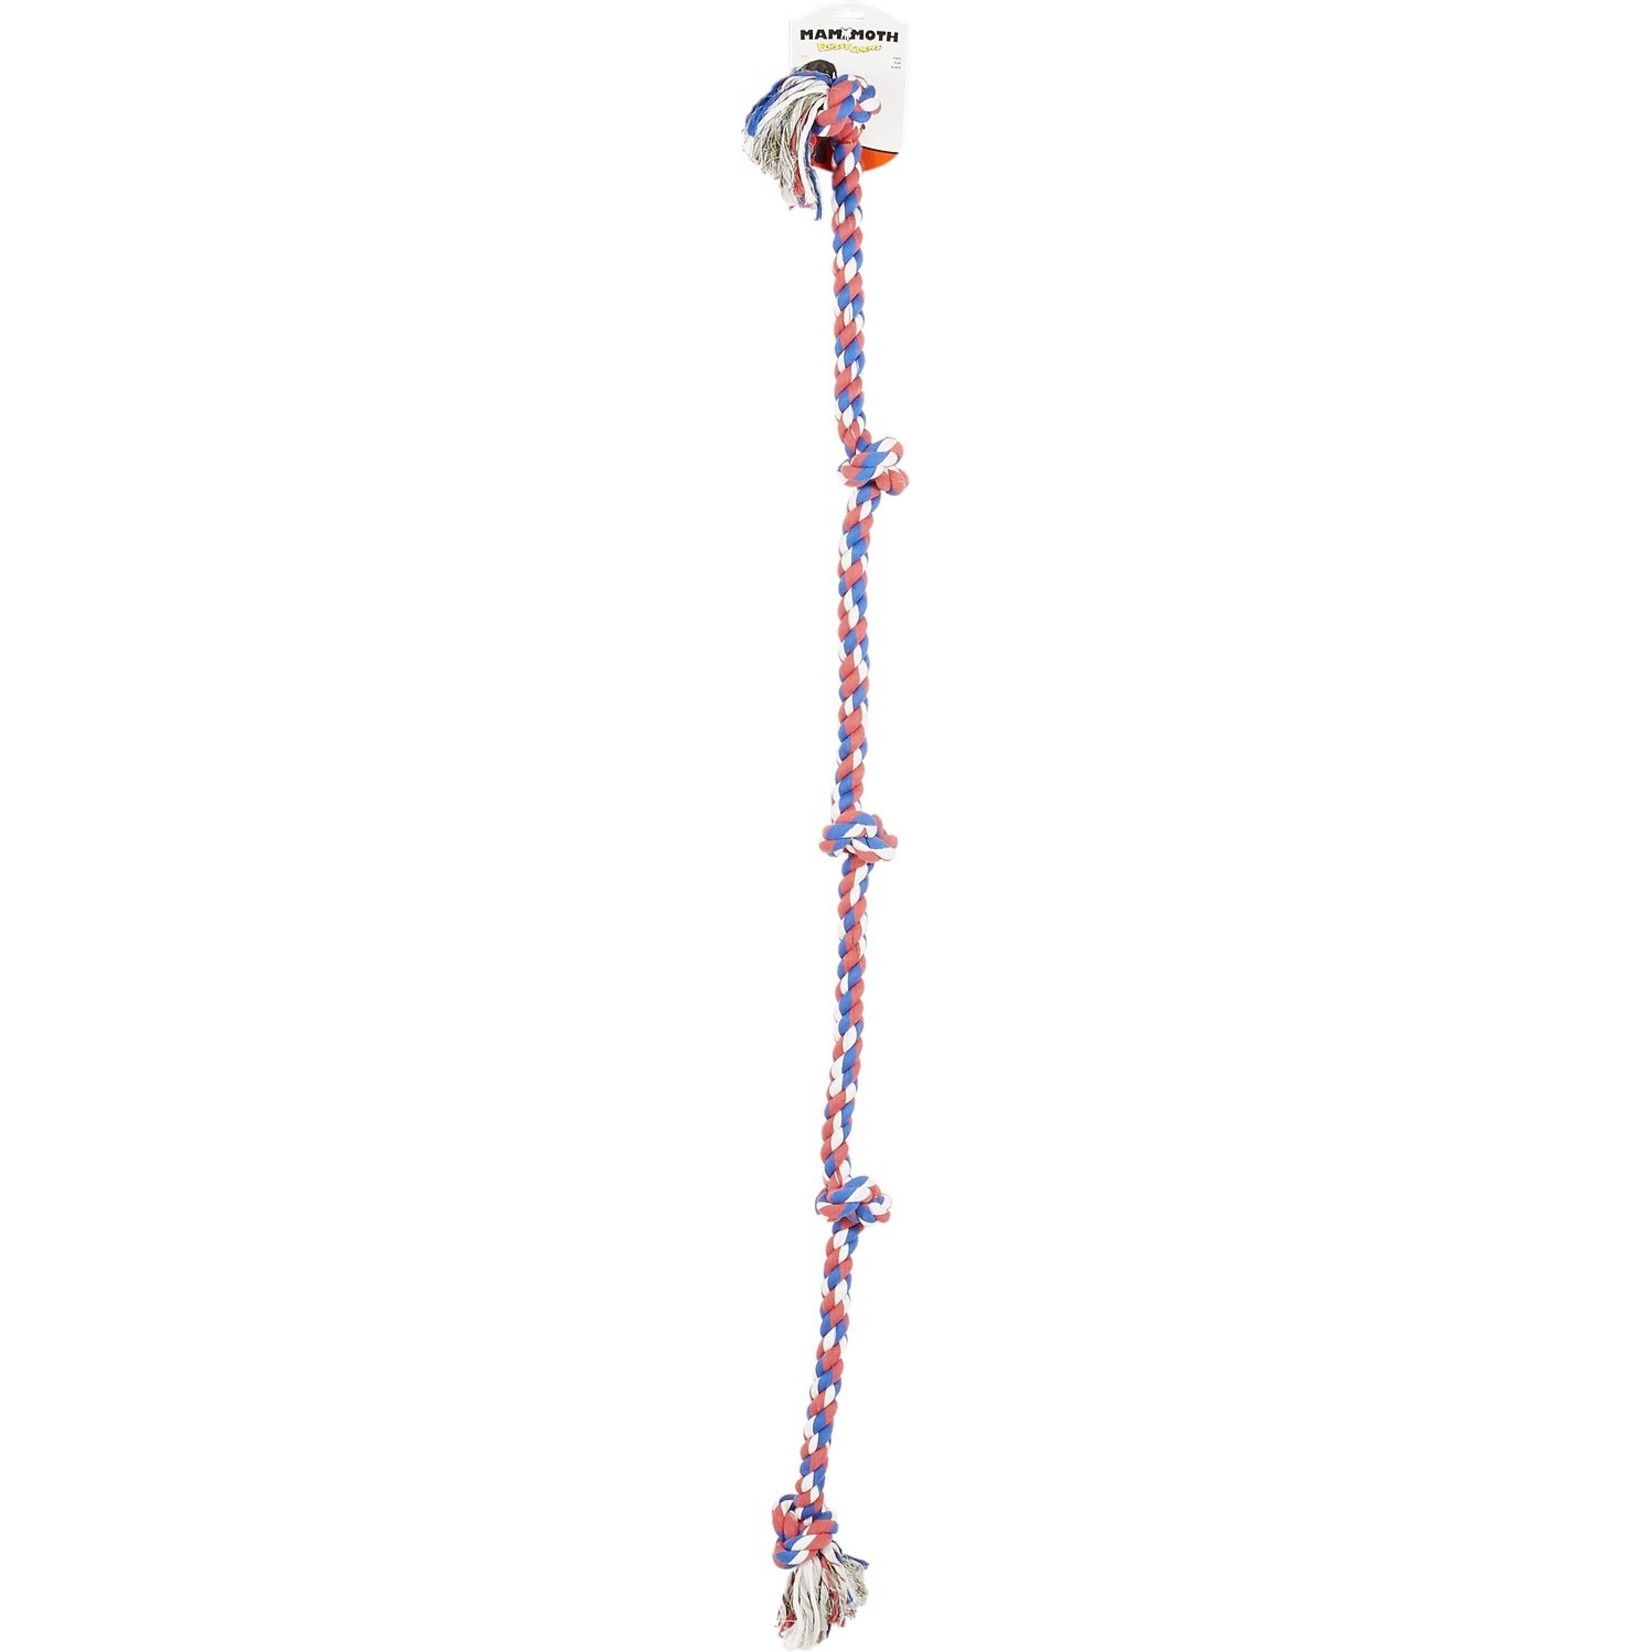 Mammoth Flossy Chews 5 Knot Super XL Dog Toy Tug Rope 72"